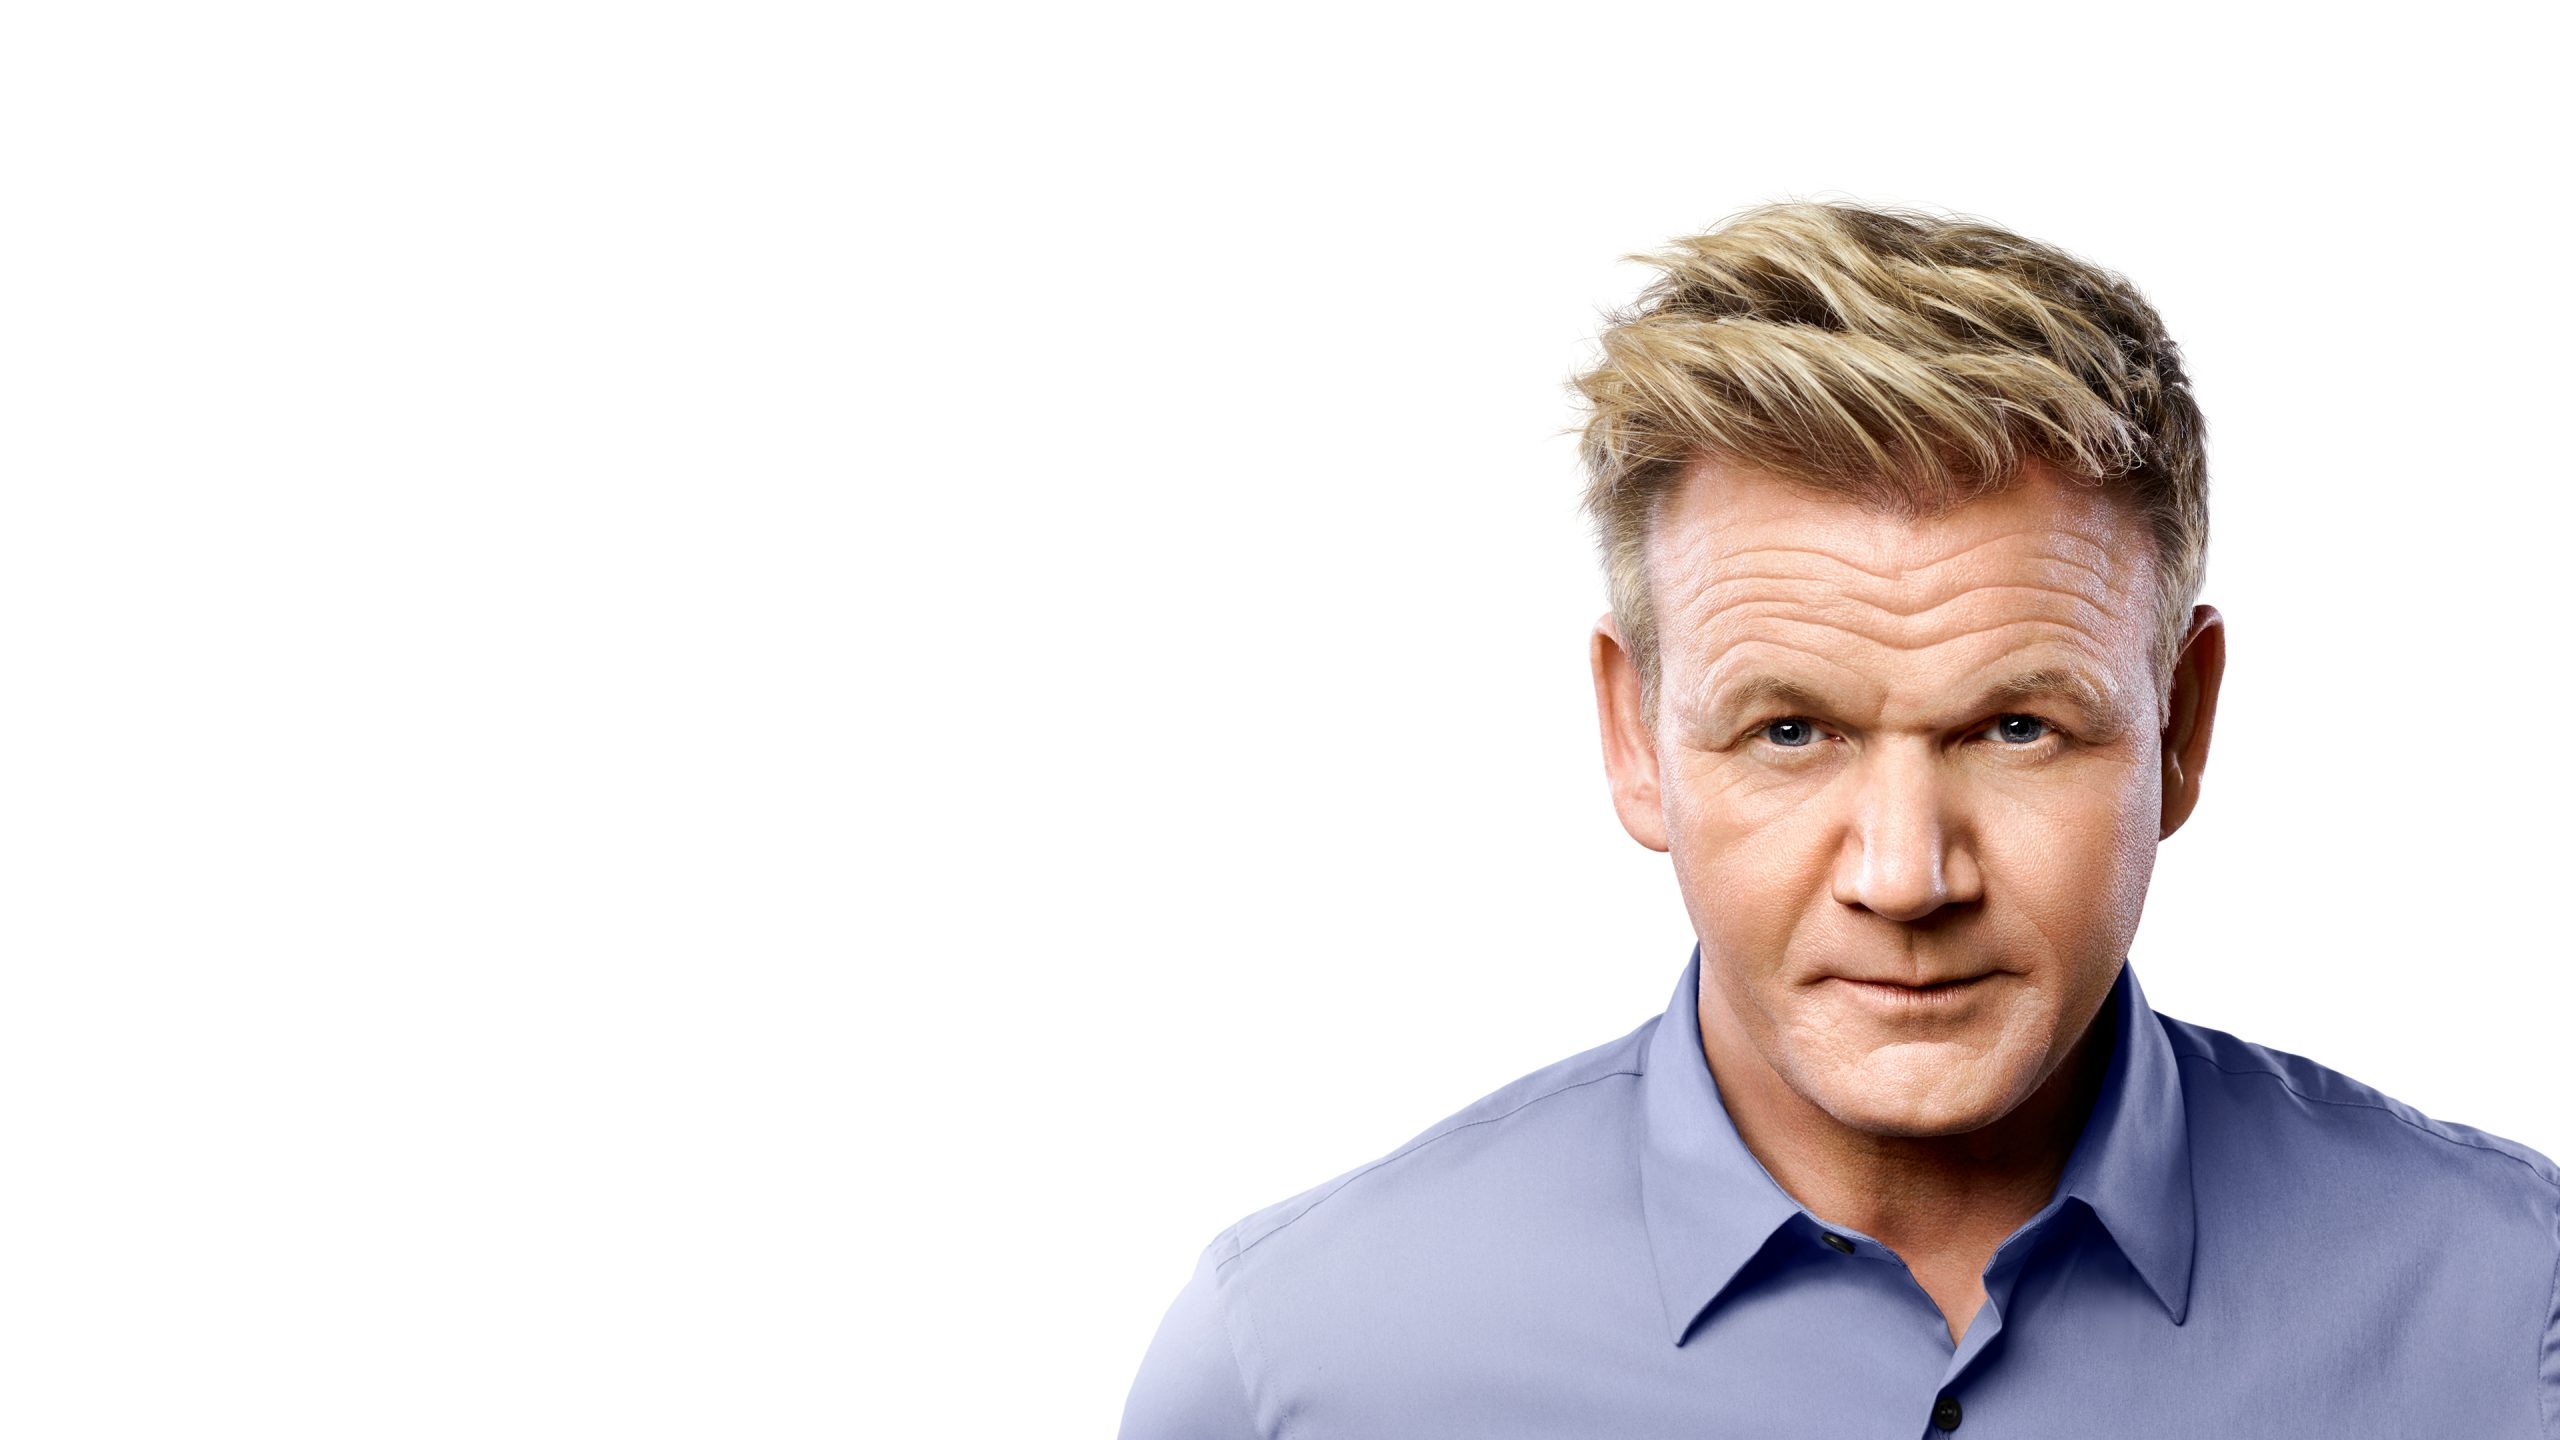 Gordon Ramsay: Combines activities on the television, film, hospitality, and food industries. 2560x1440 HD Background.